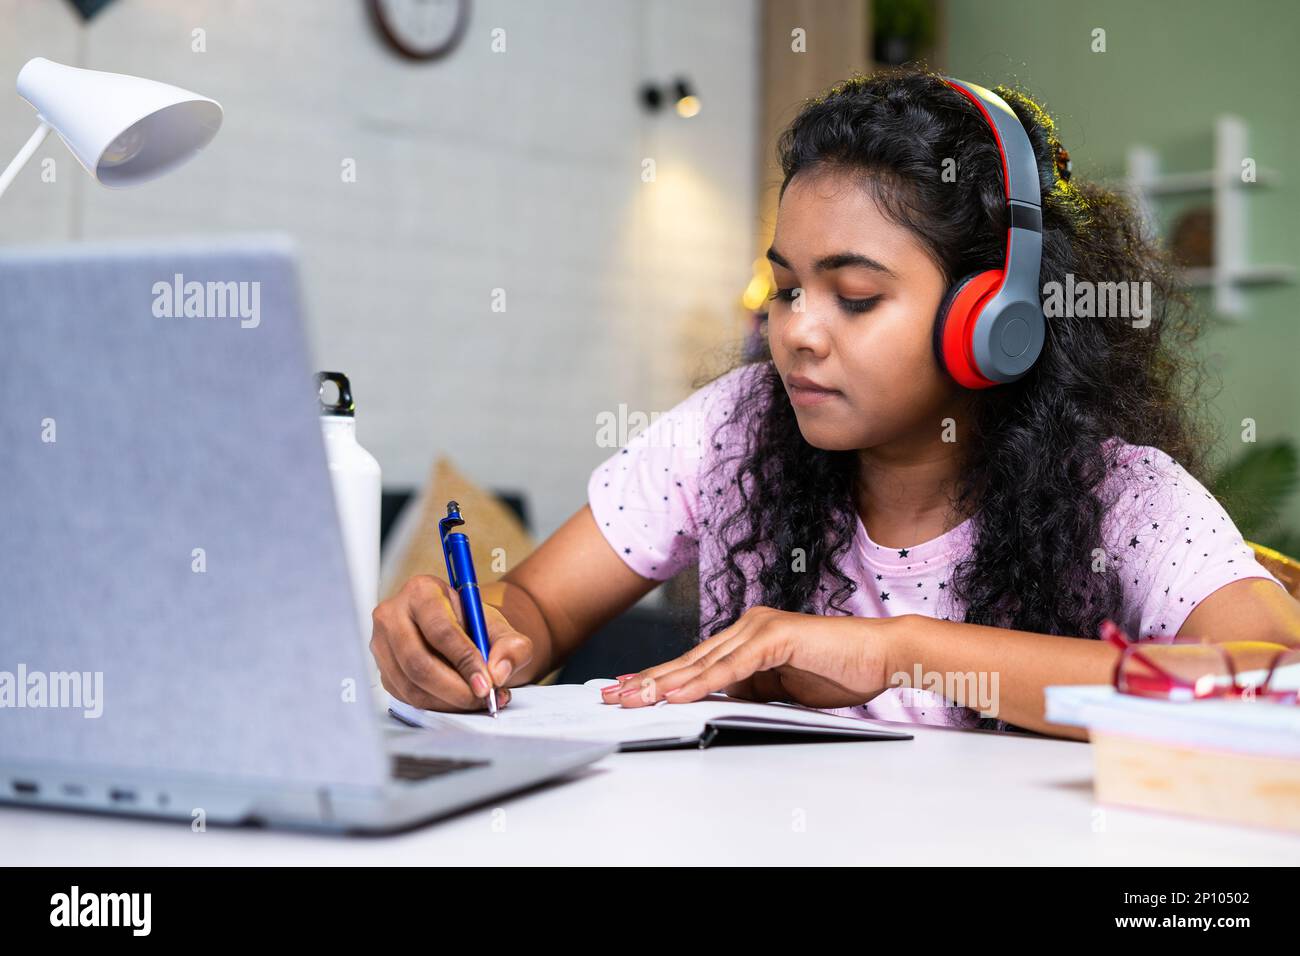 Girl student making notes from online class using laptop at home by wearing wirless headphones - concept of development, learning and technology Stock Photo